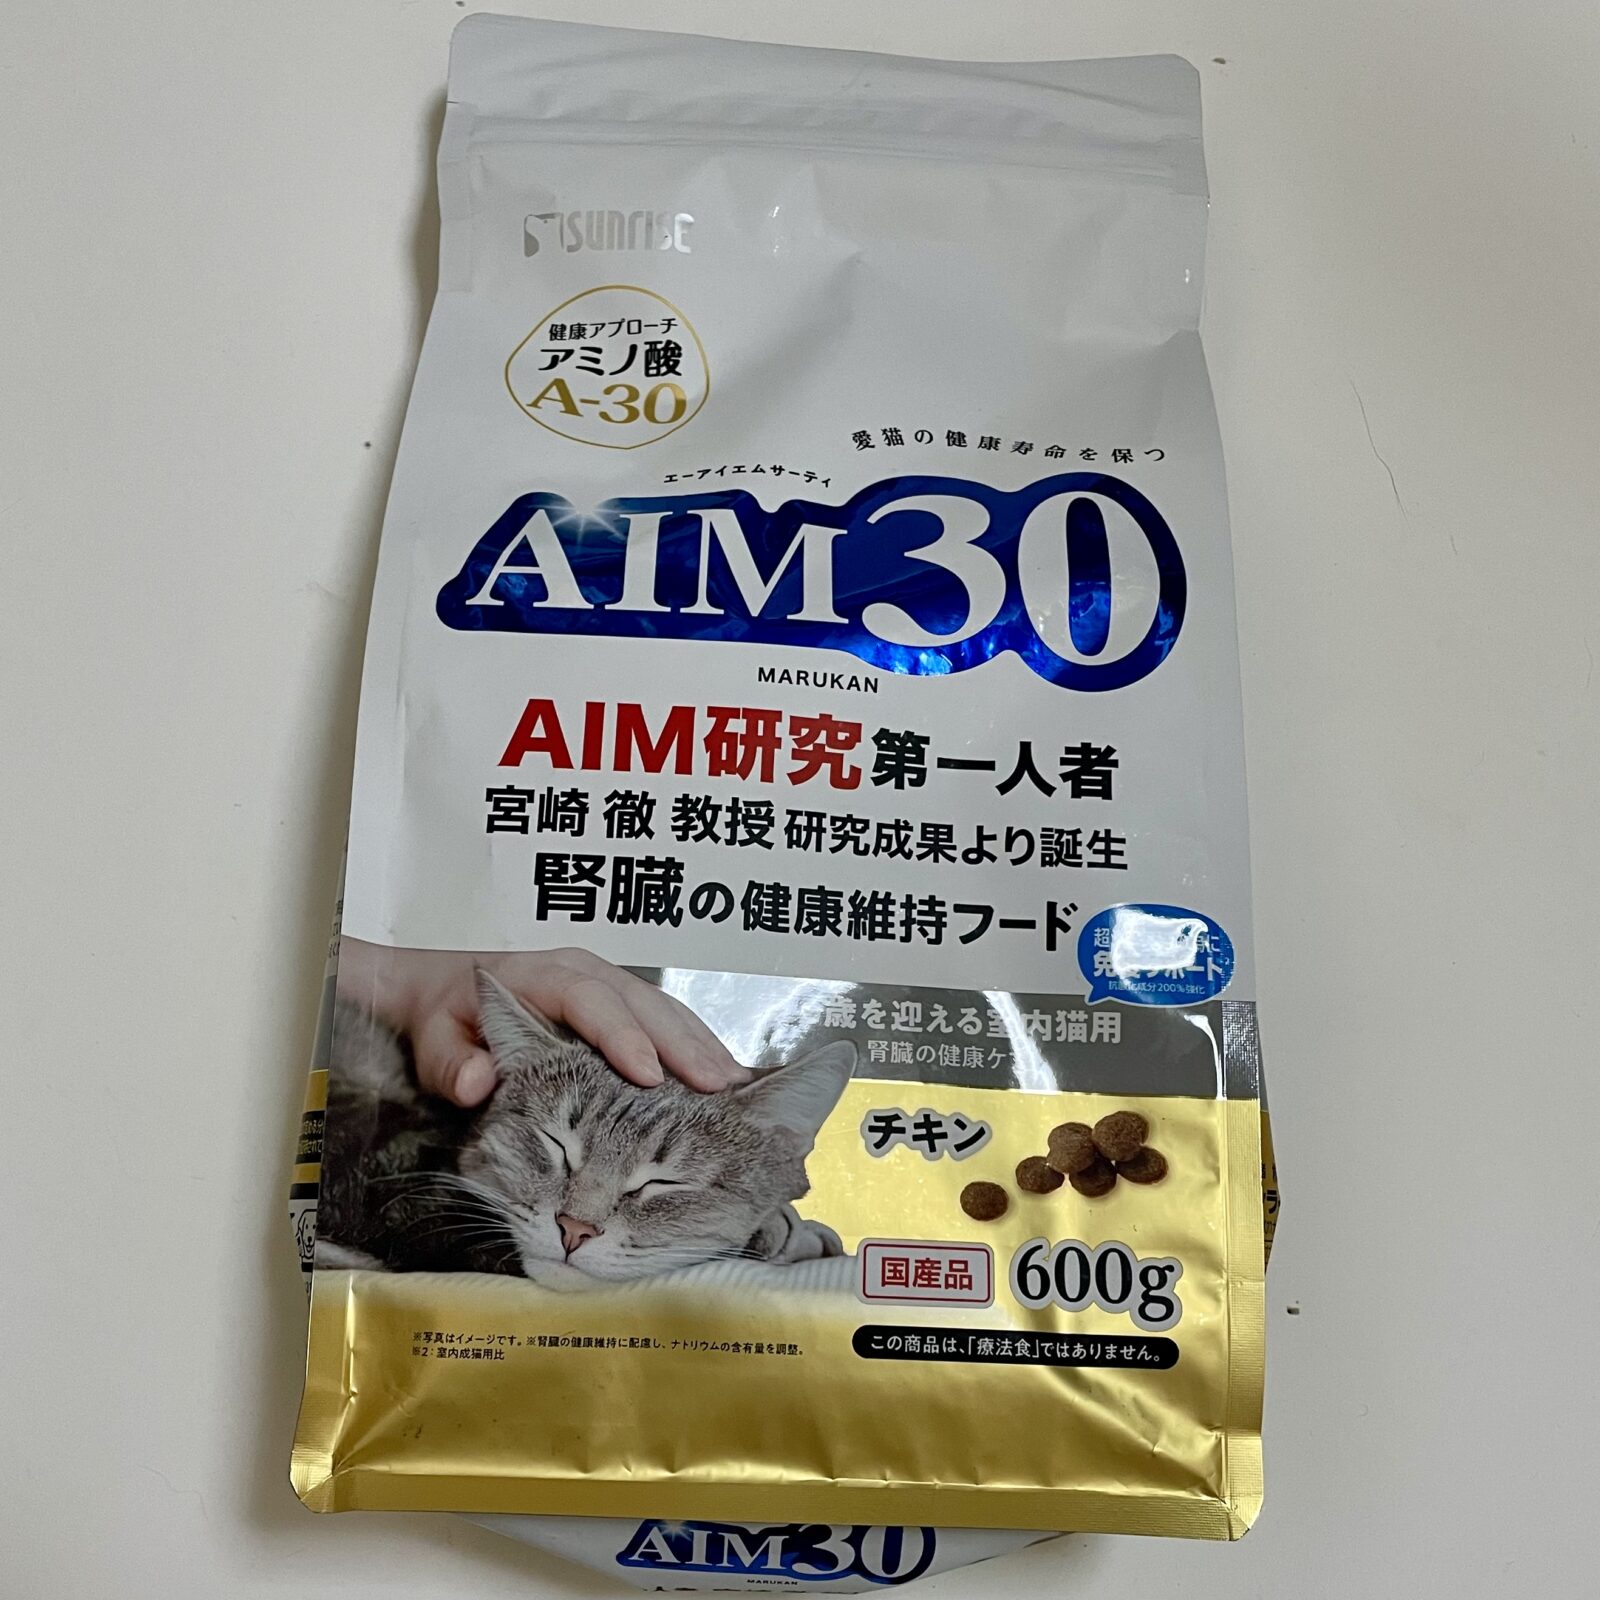 Food is on sale for "The Day Cats Live to 30." 猫健康情報, 猫が30歳まで生きる日 Hidemi Shimura